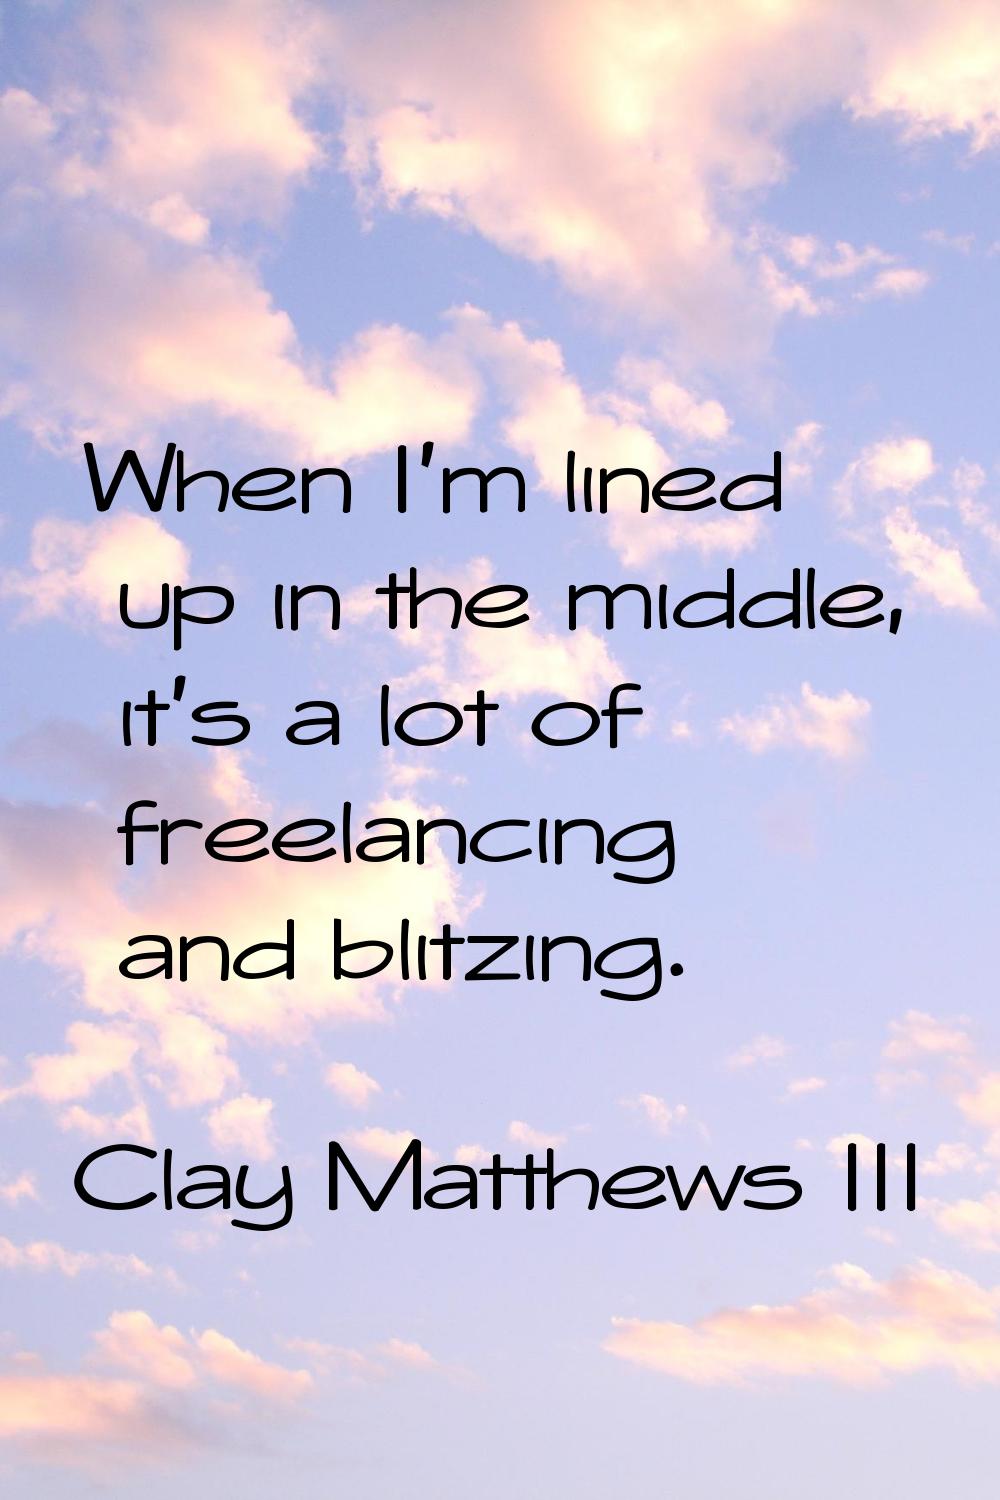 When I'm lined up in the middle, it's a lot of freelancing and blitzing.